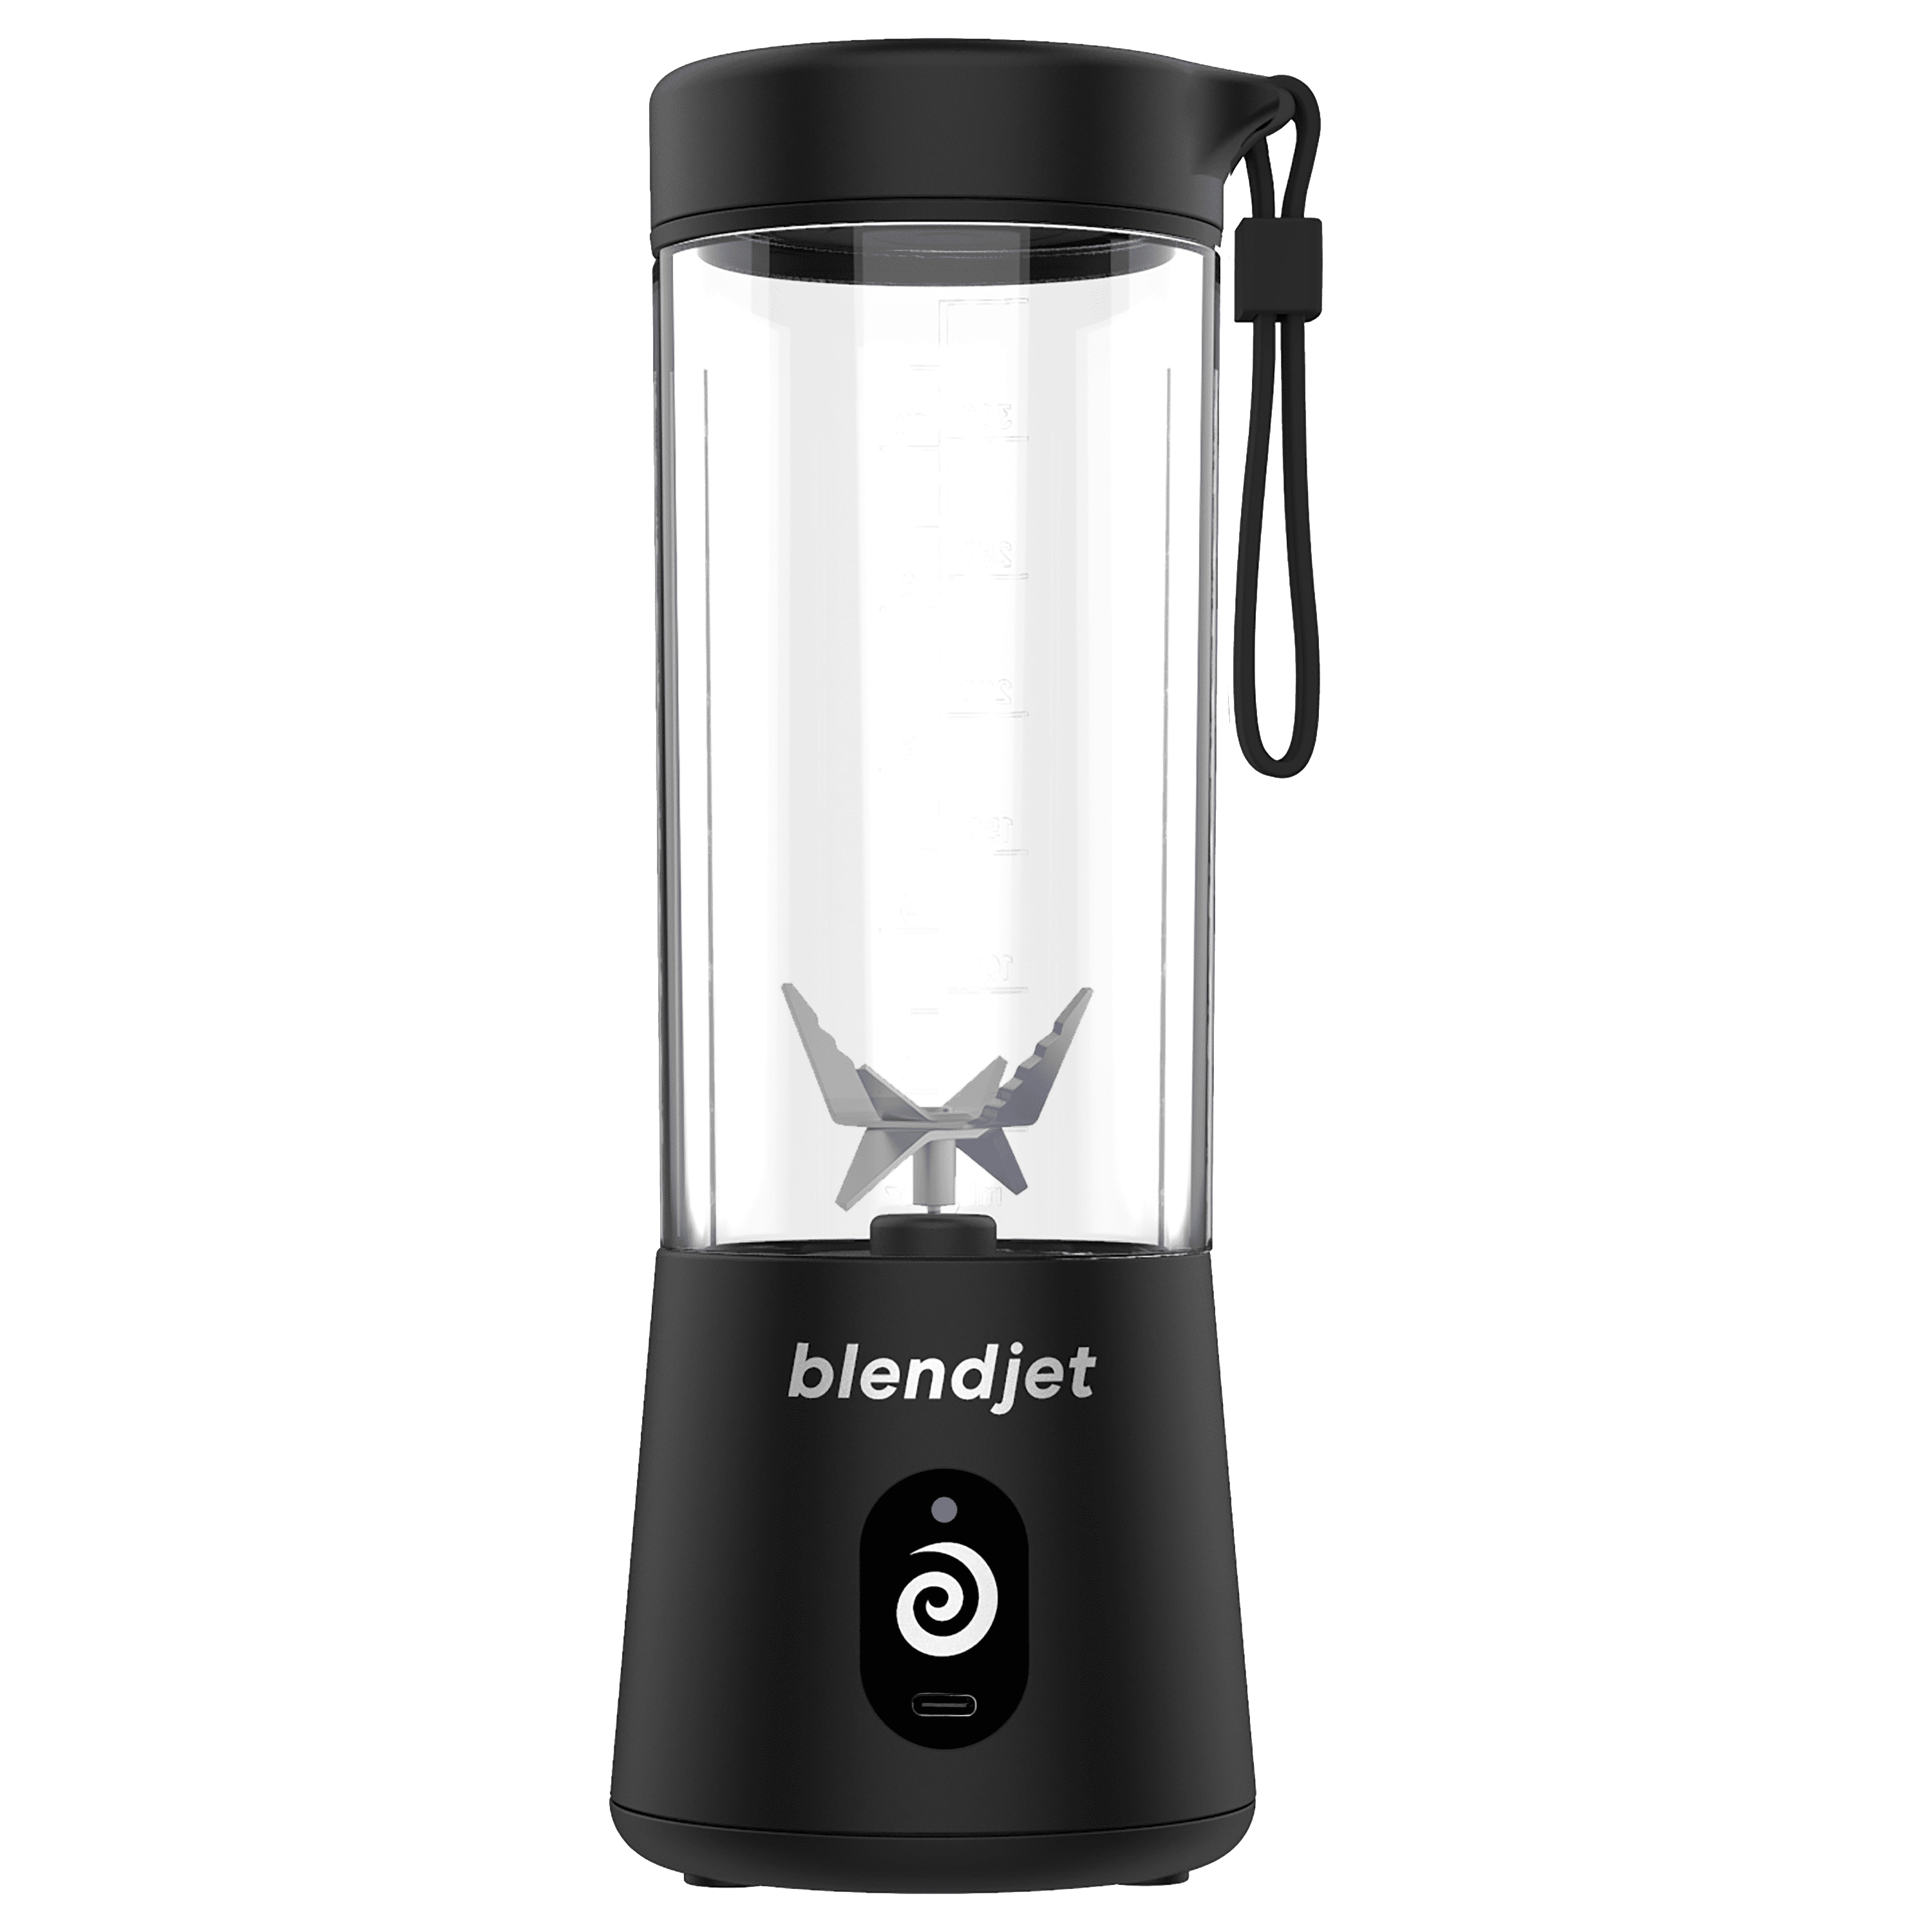 BlendJet One Review: The Portable Blender With Power